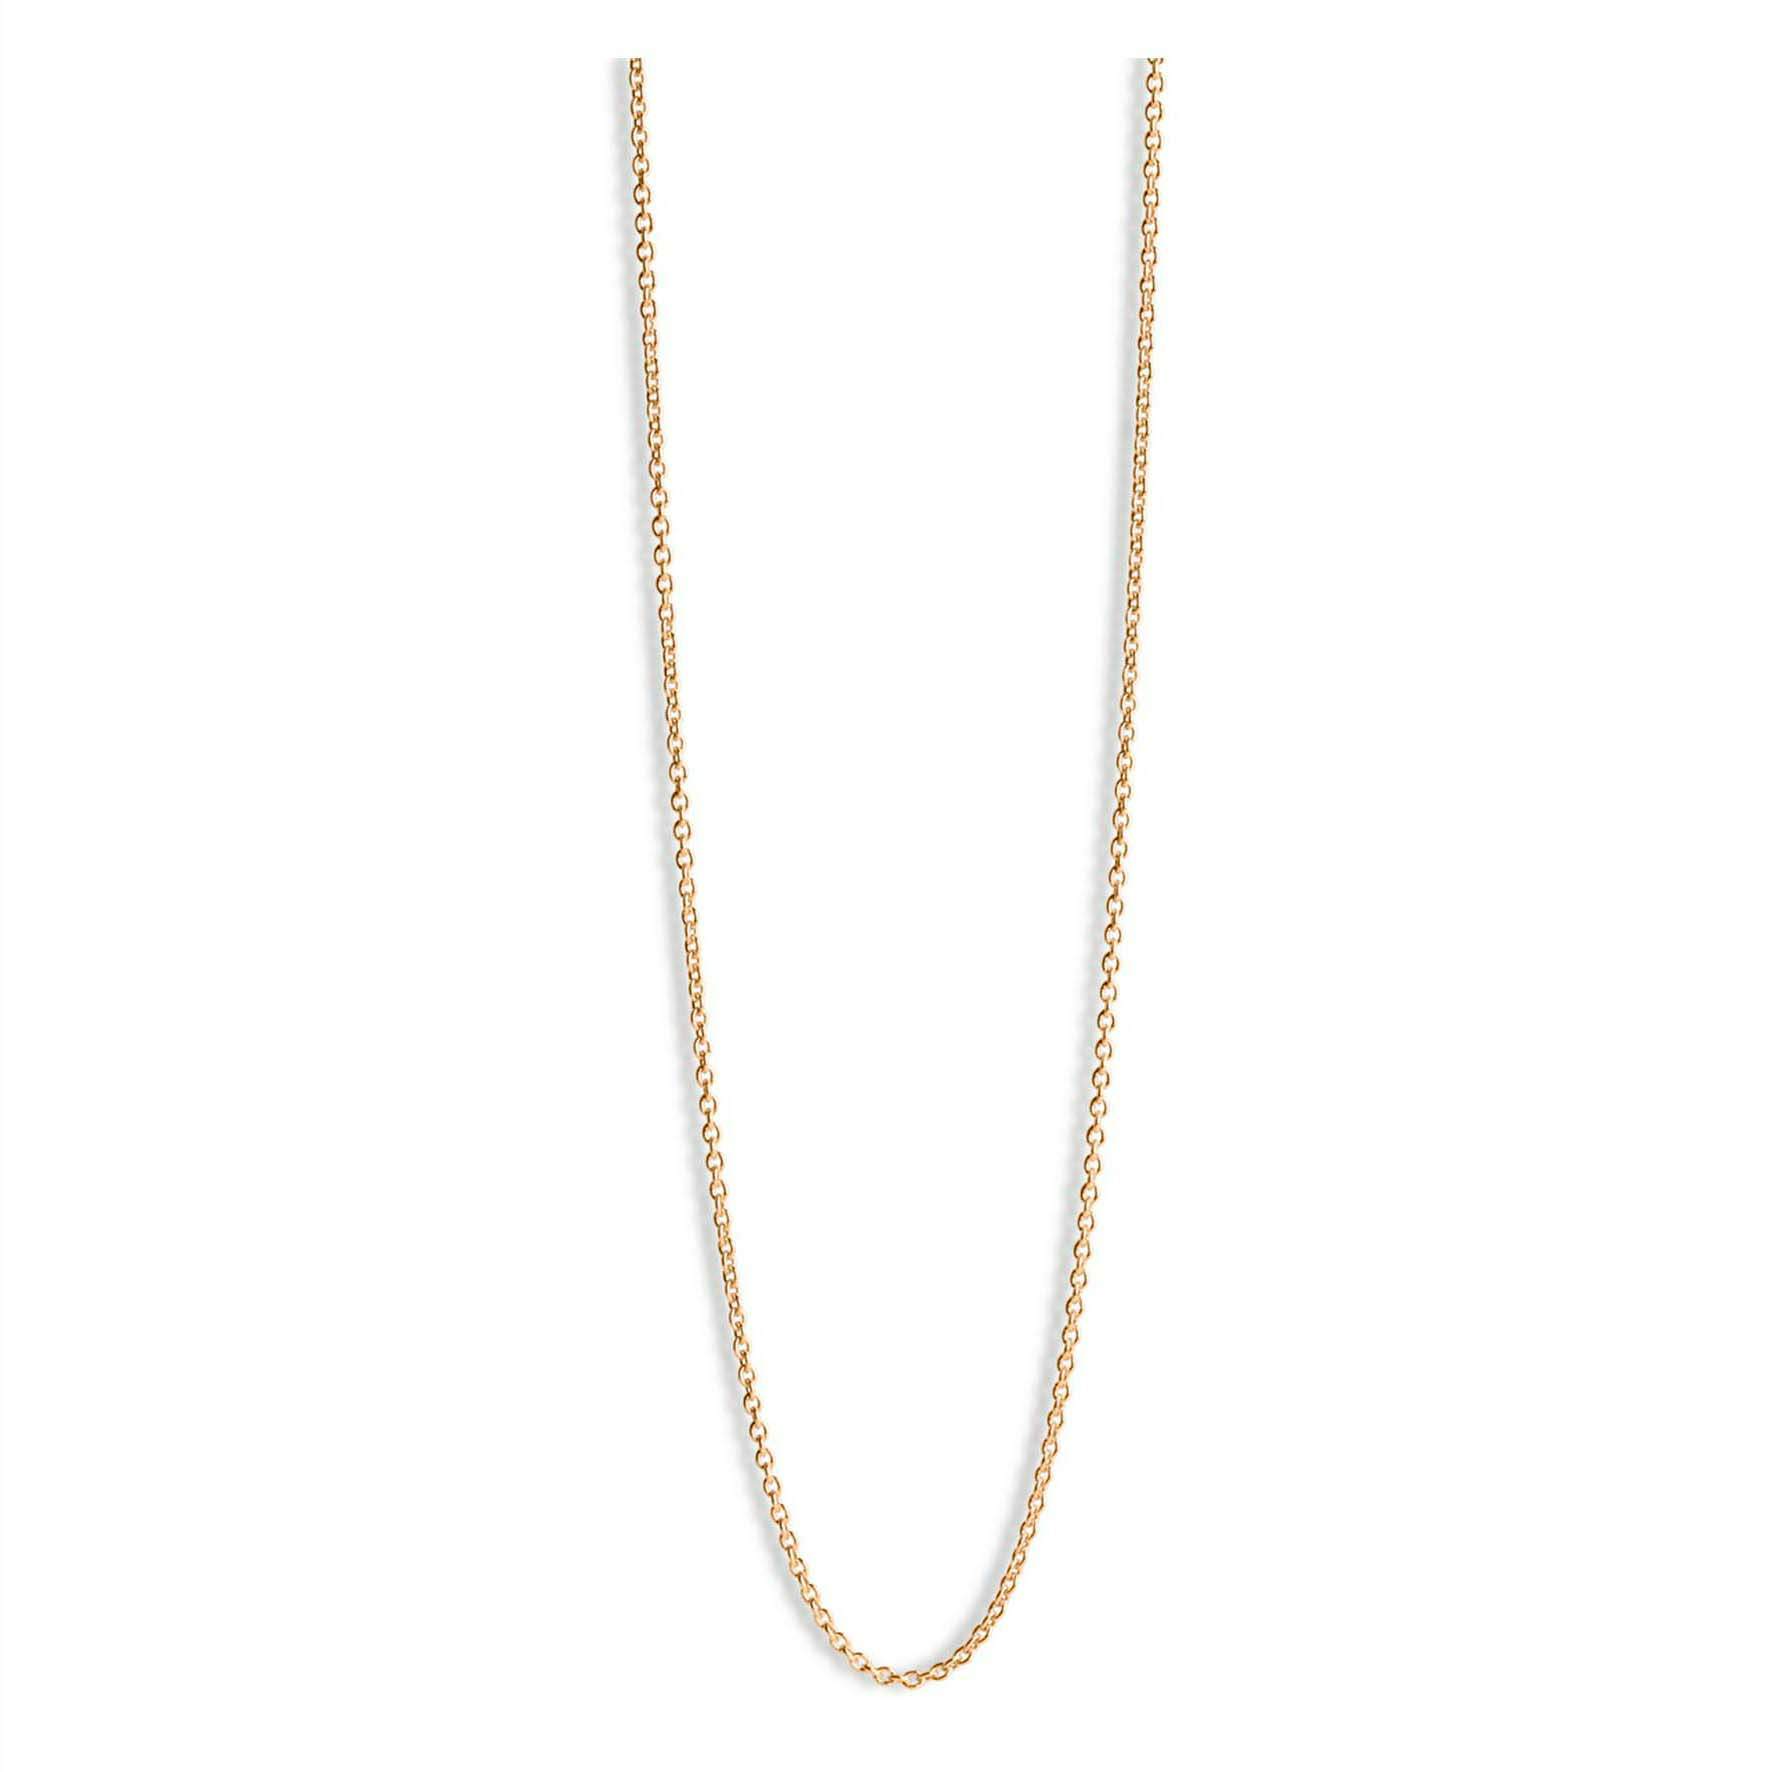 Anchor Chain Necklace from Jane Kønig in Goldplated-Silver Sterling 925|